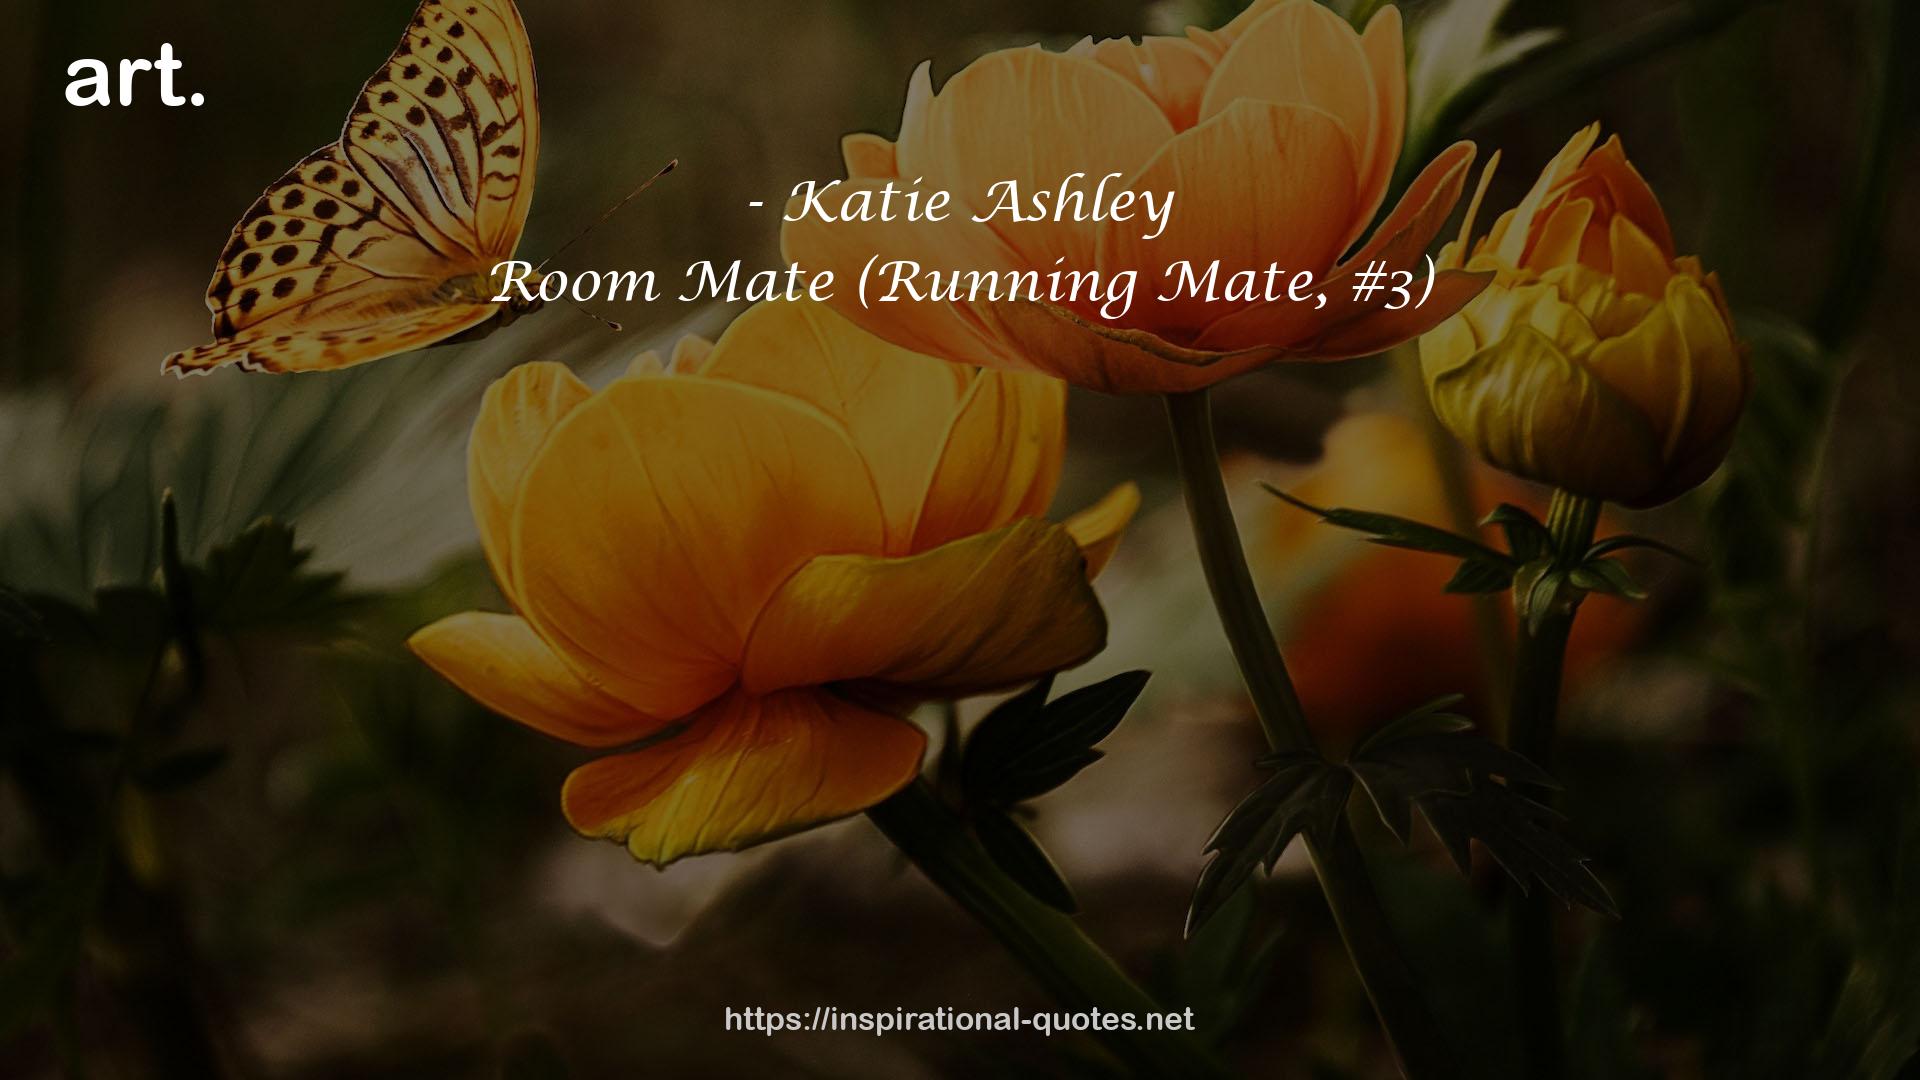 Room Mate (Running Mate, #3) QUOTES